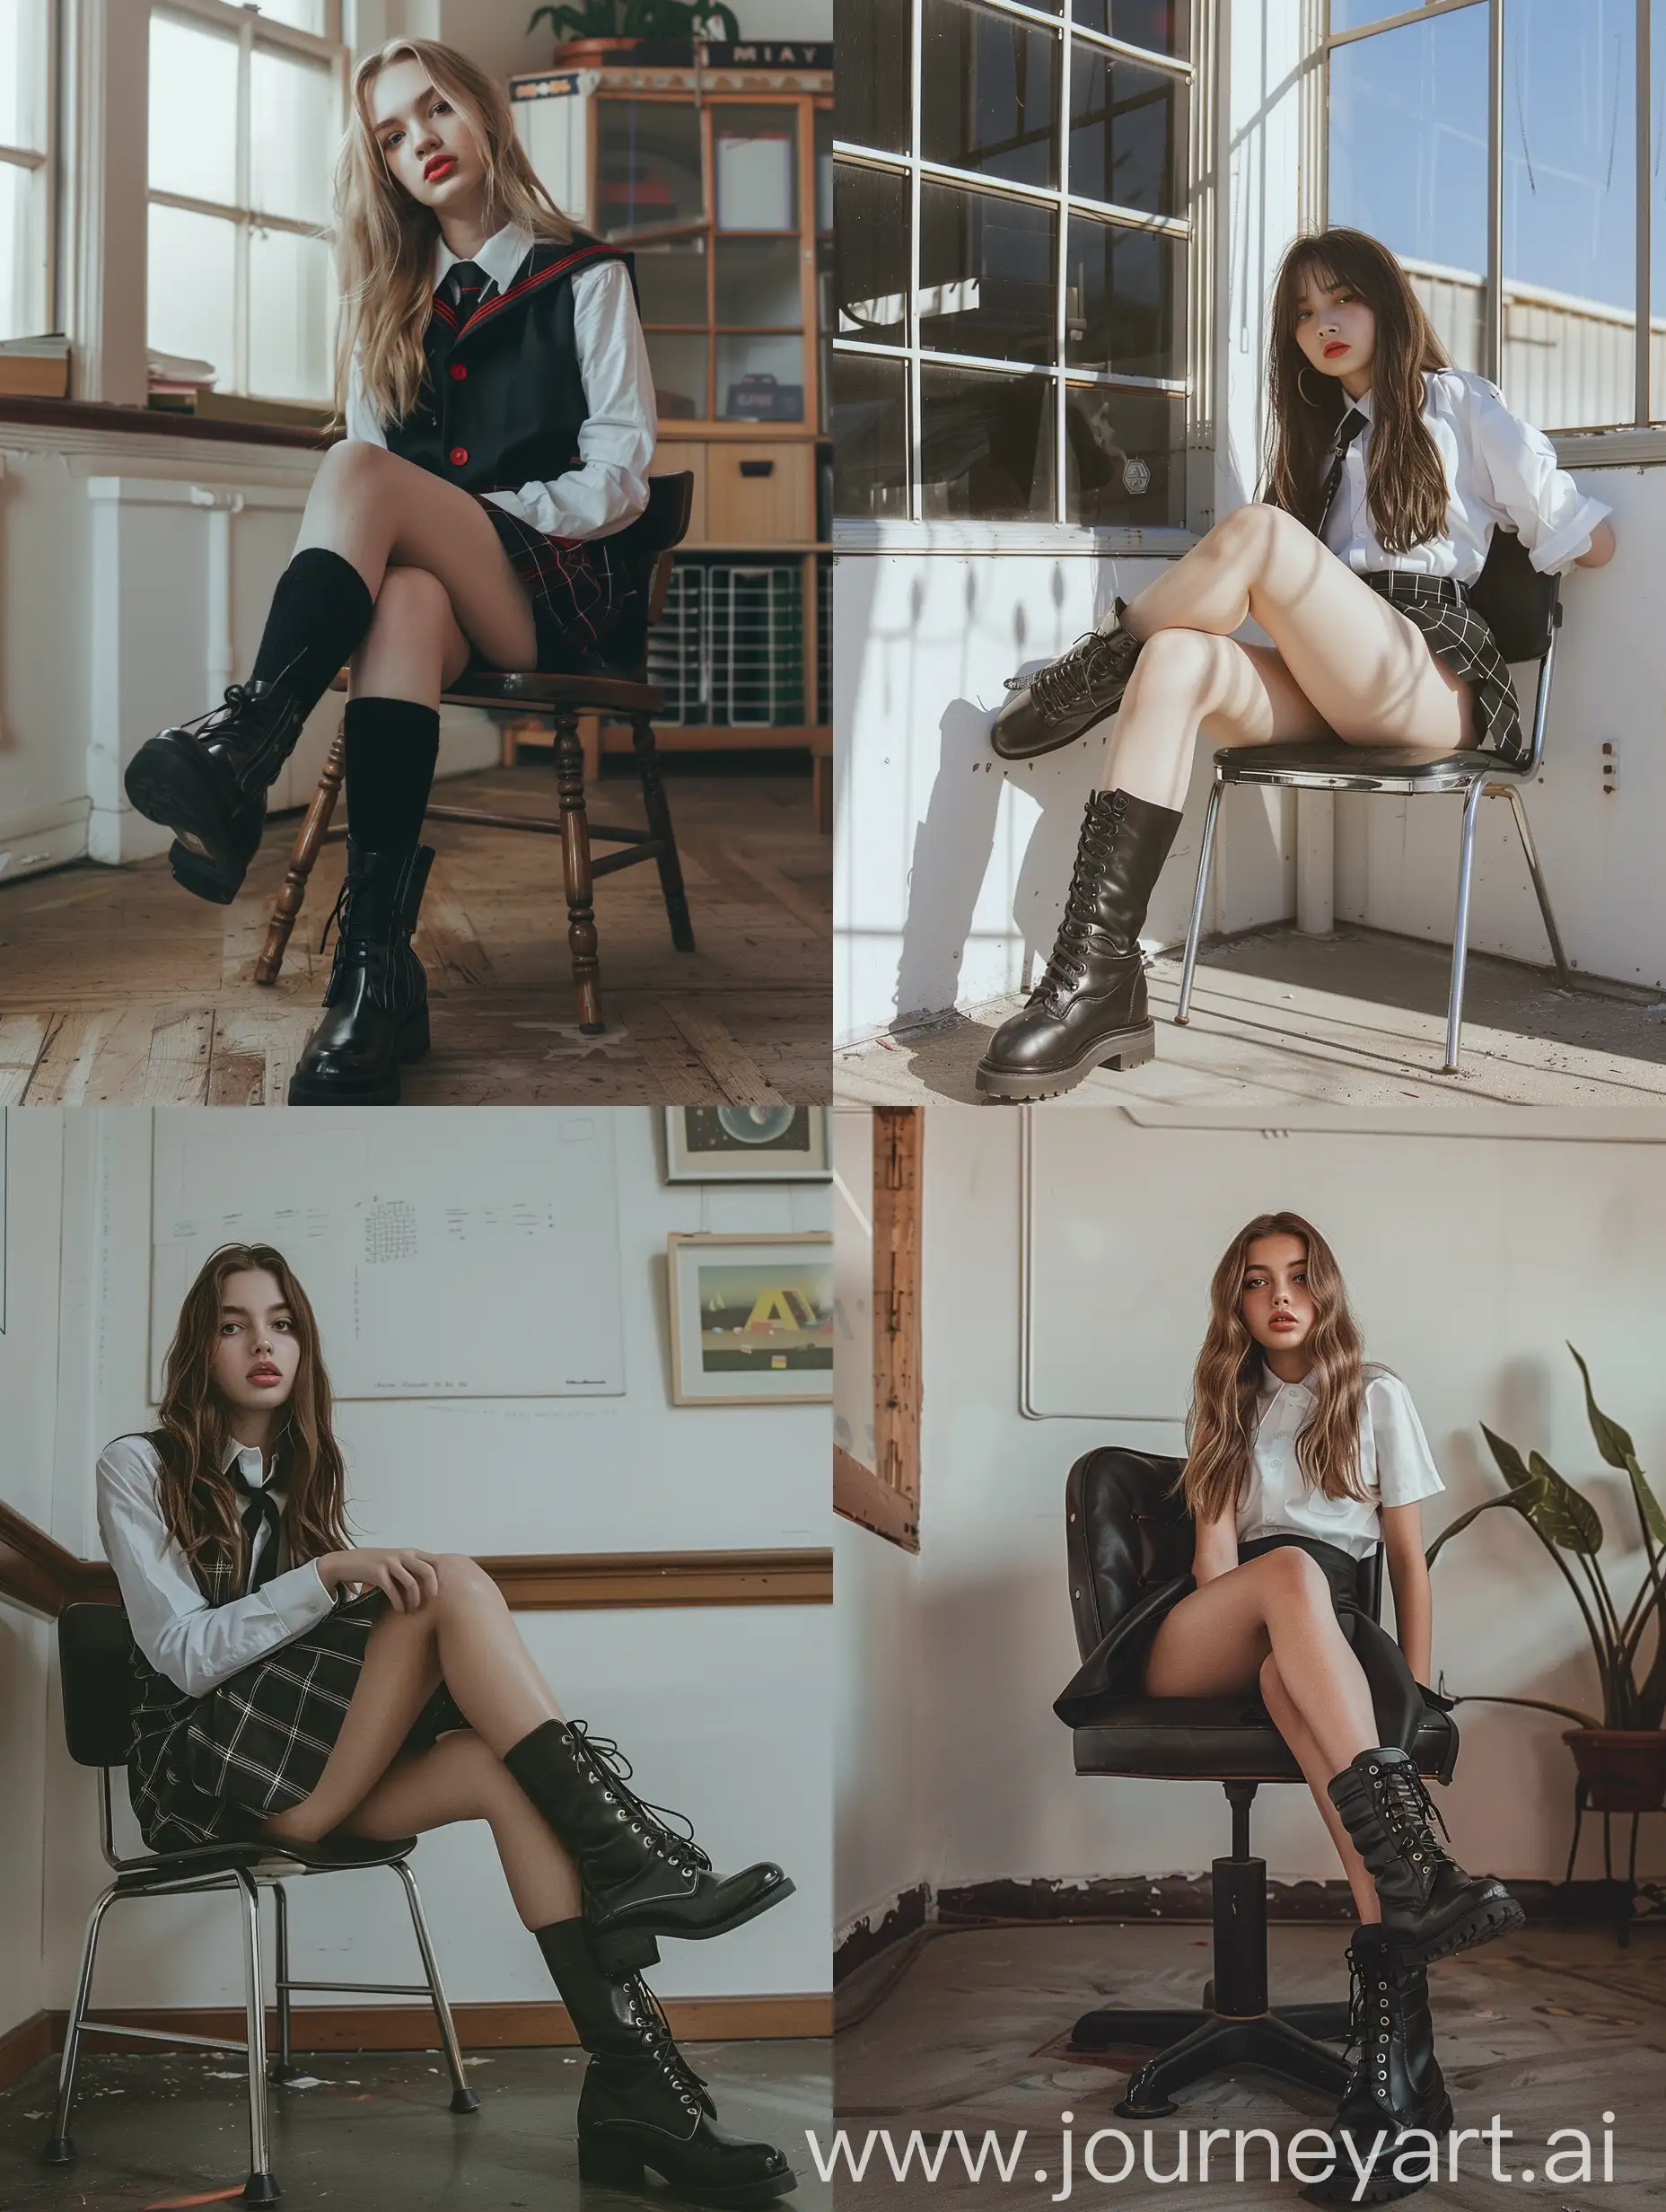 Aesthetic Instagram  of a teenage girl influencer, sitting on chair, school uniform, black boots